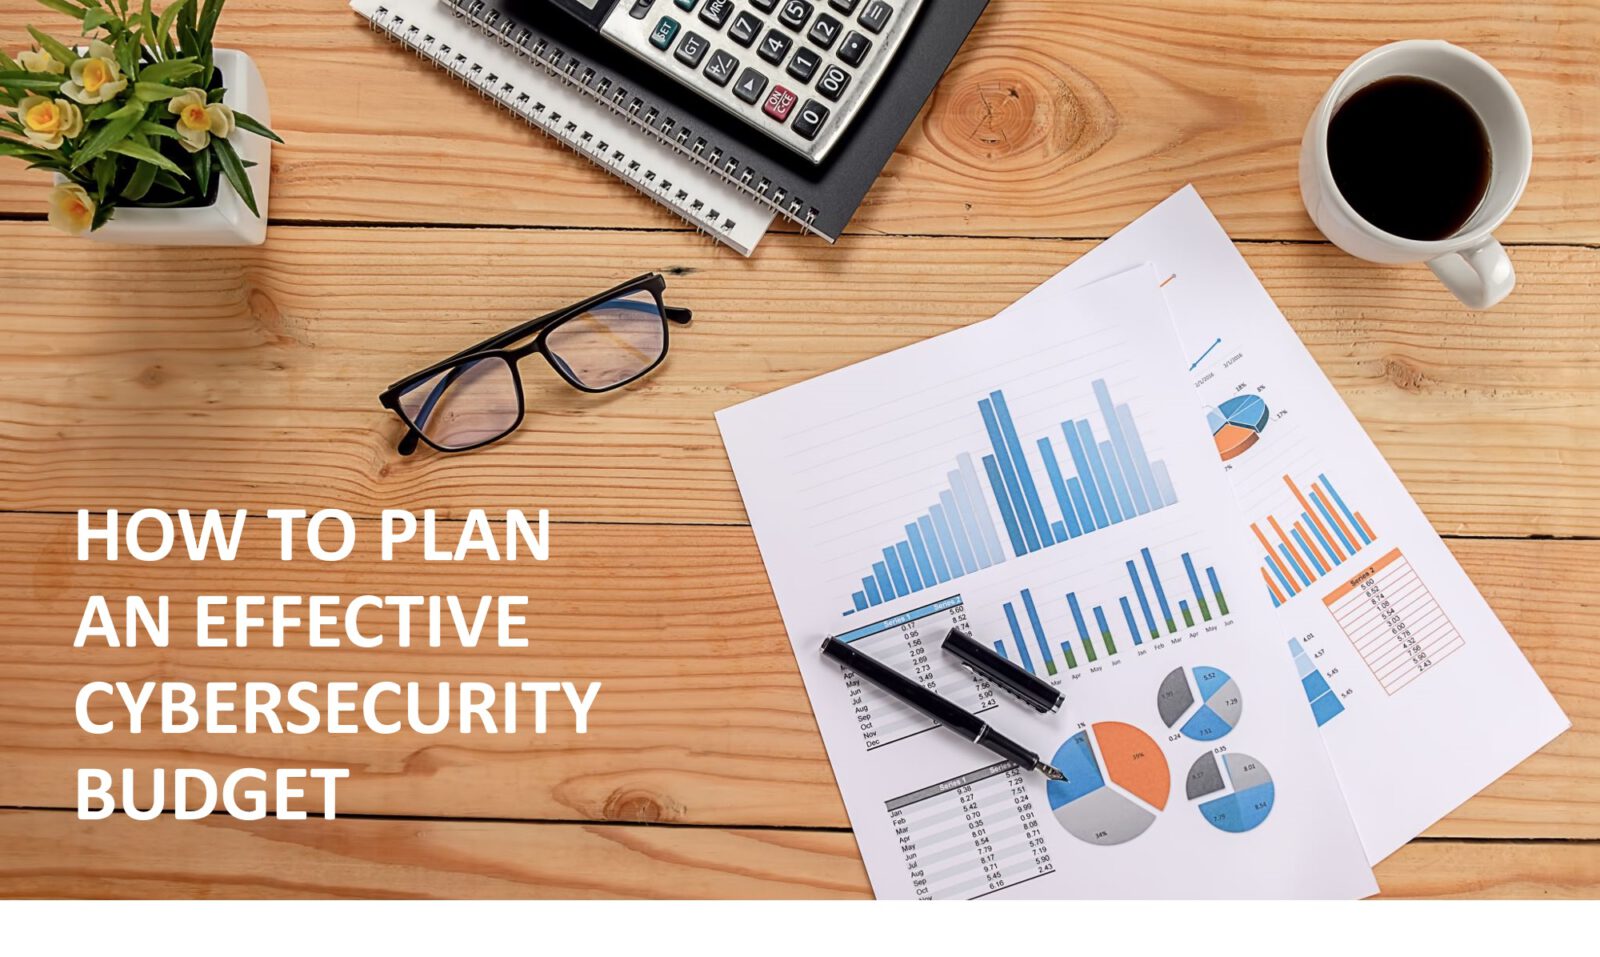 How to Plan an Effective Cybersecurity Budget